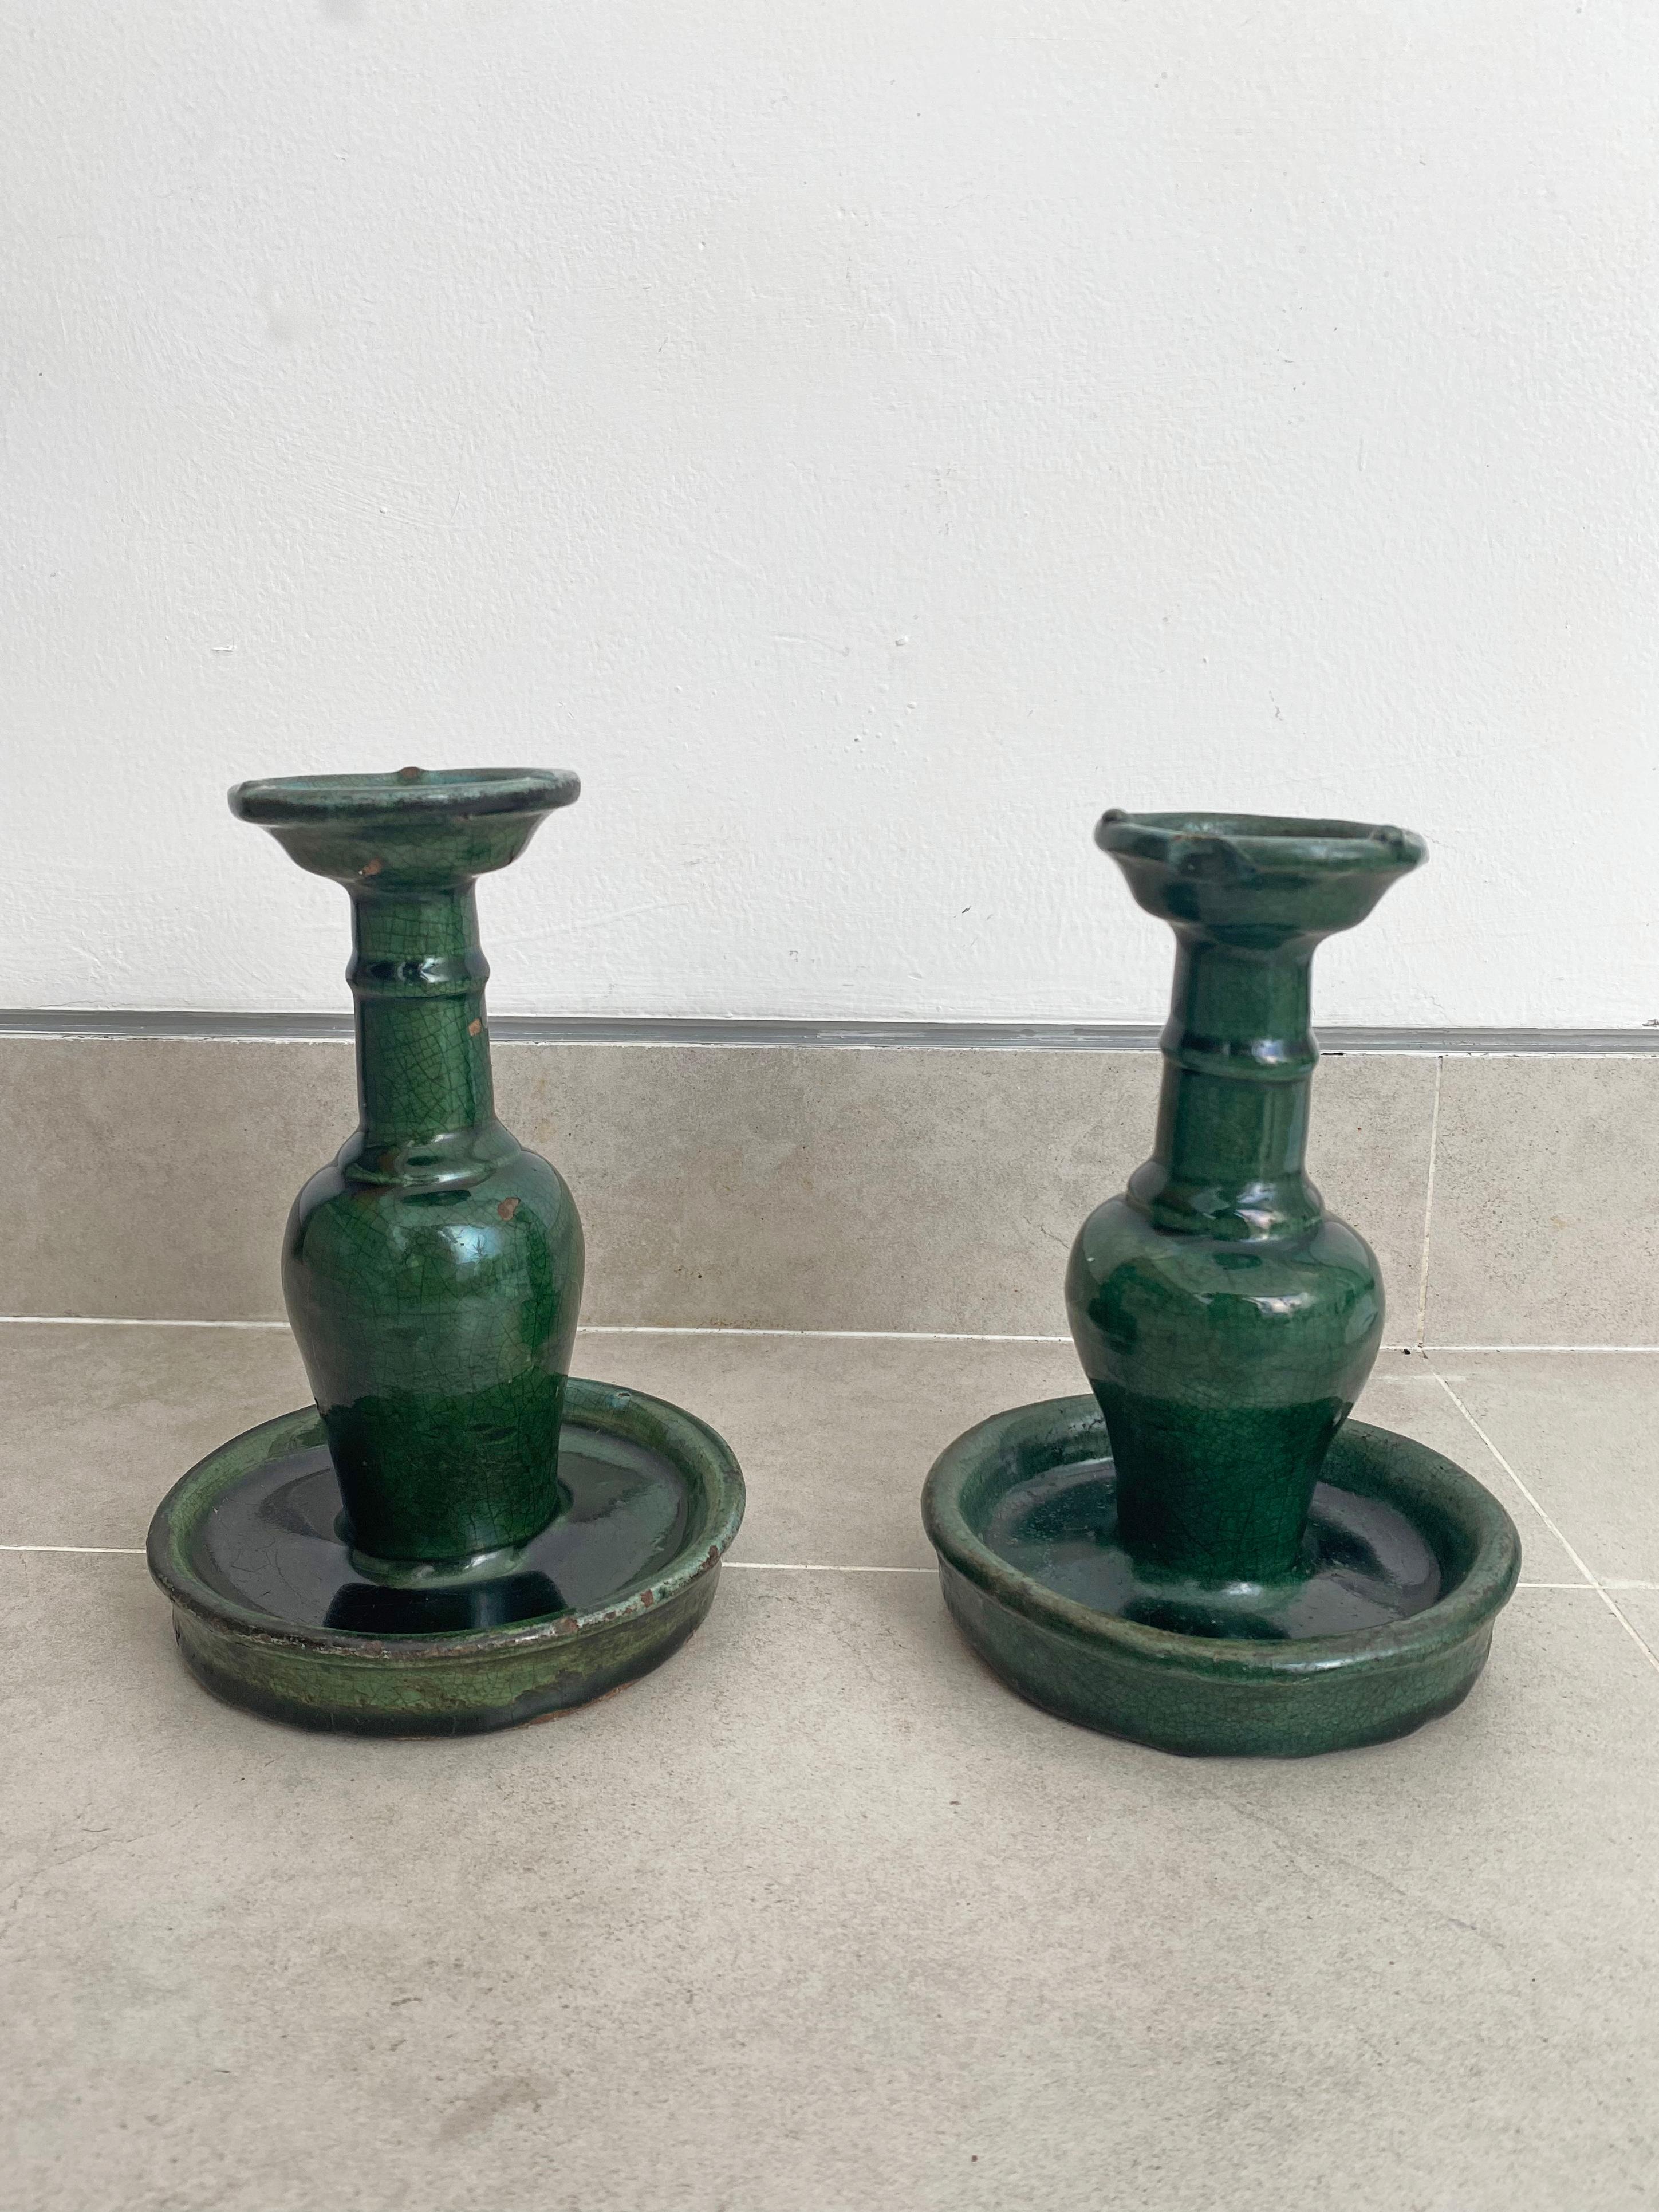 This set of Shiwan ware oil lamps from the early 20th century features the distinctive green glaze. Shiwan ware is a style of Chinese pottery from the Shiwanzhen district near Guangdong, China. With a stunning green finish they would make for unique